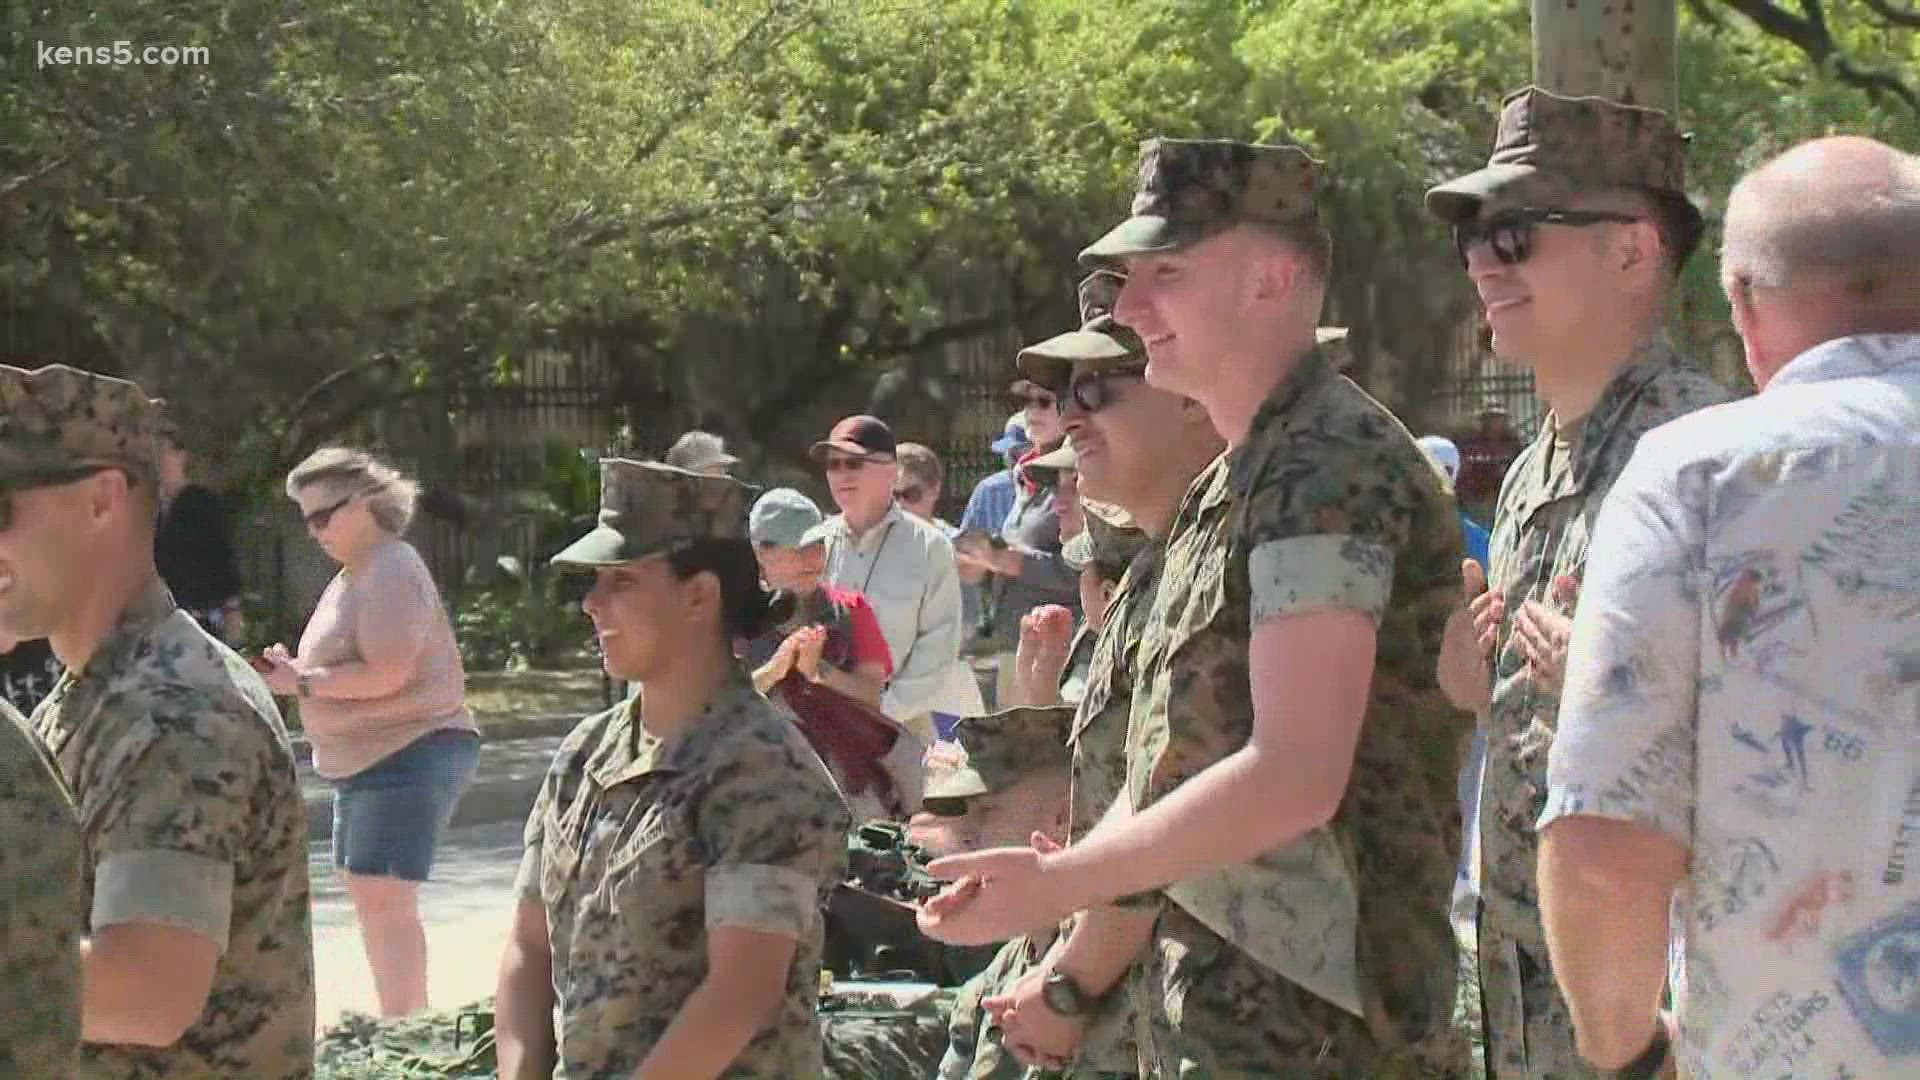 The free event allowed people to meet with marines and view some of the latest military equipment.